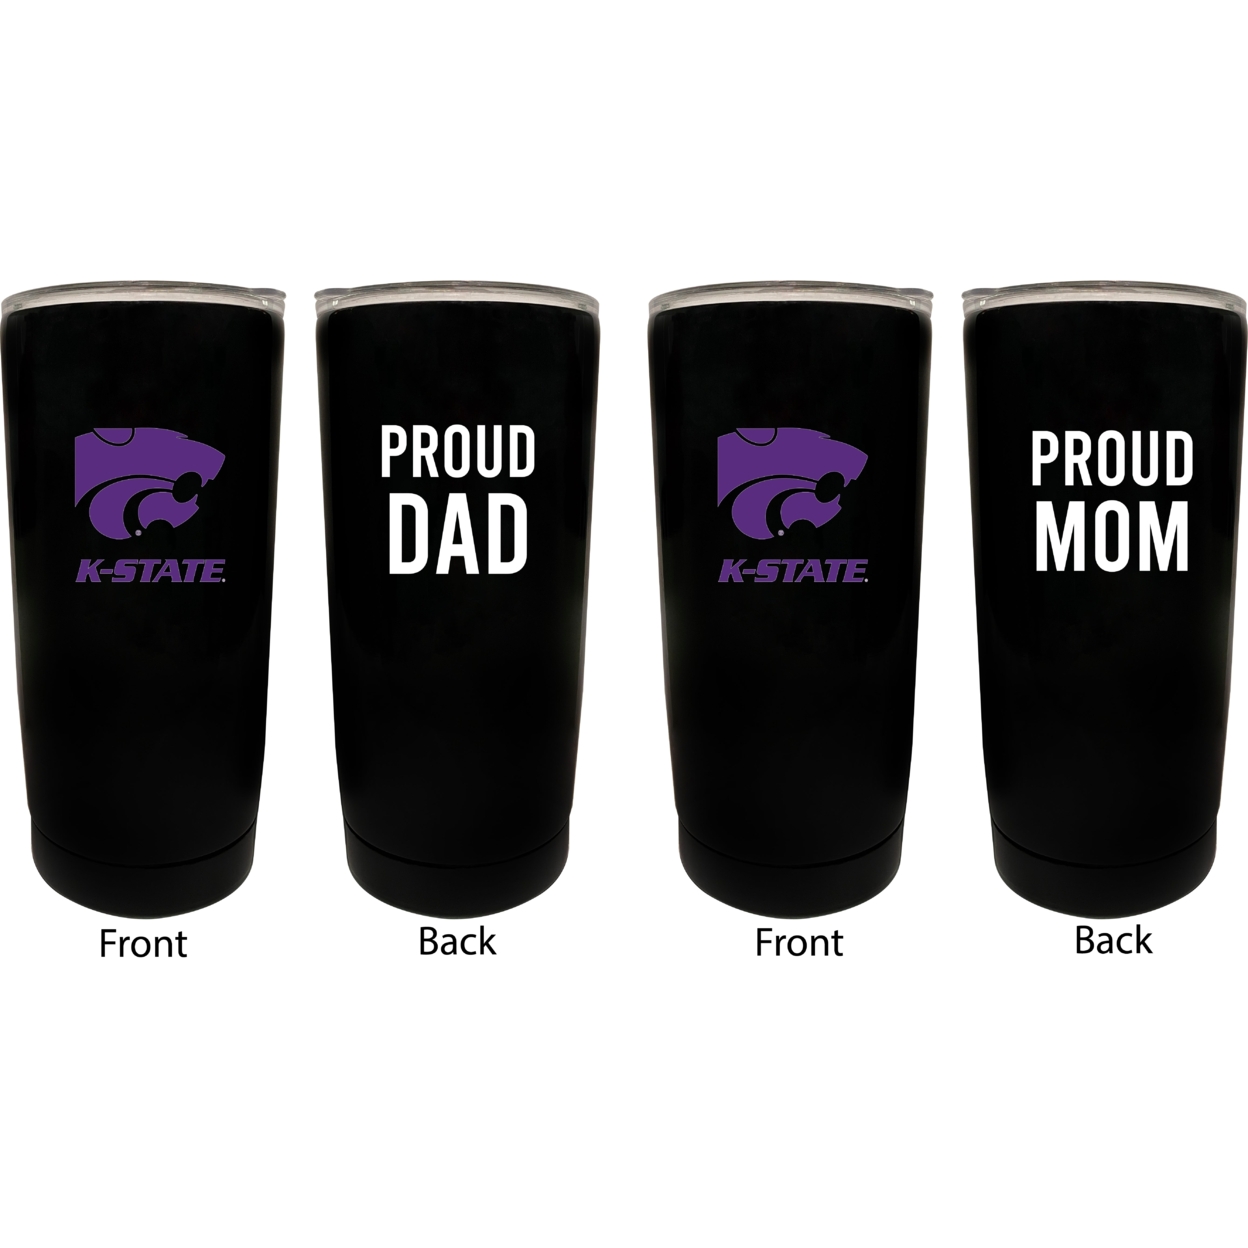 Kansas State Wildcats Proud Mom And Dad 16 Oz Insulated Stainless Steel Tumblers 2 Pack Black.